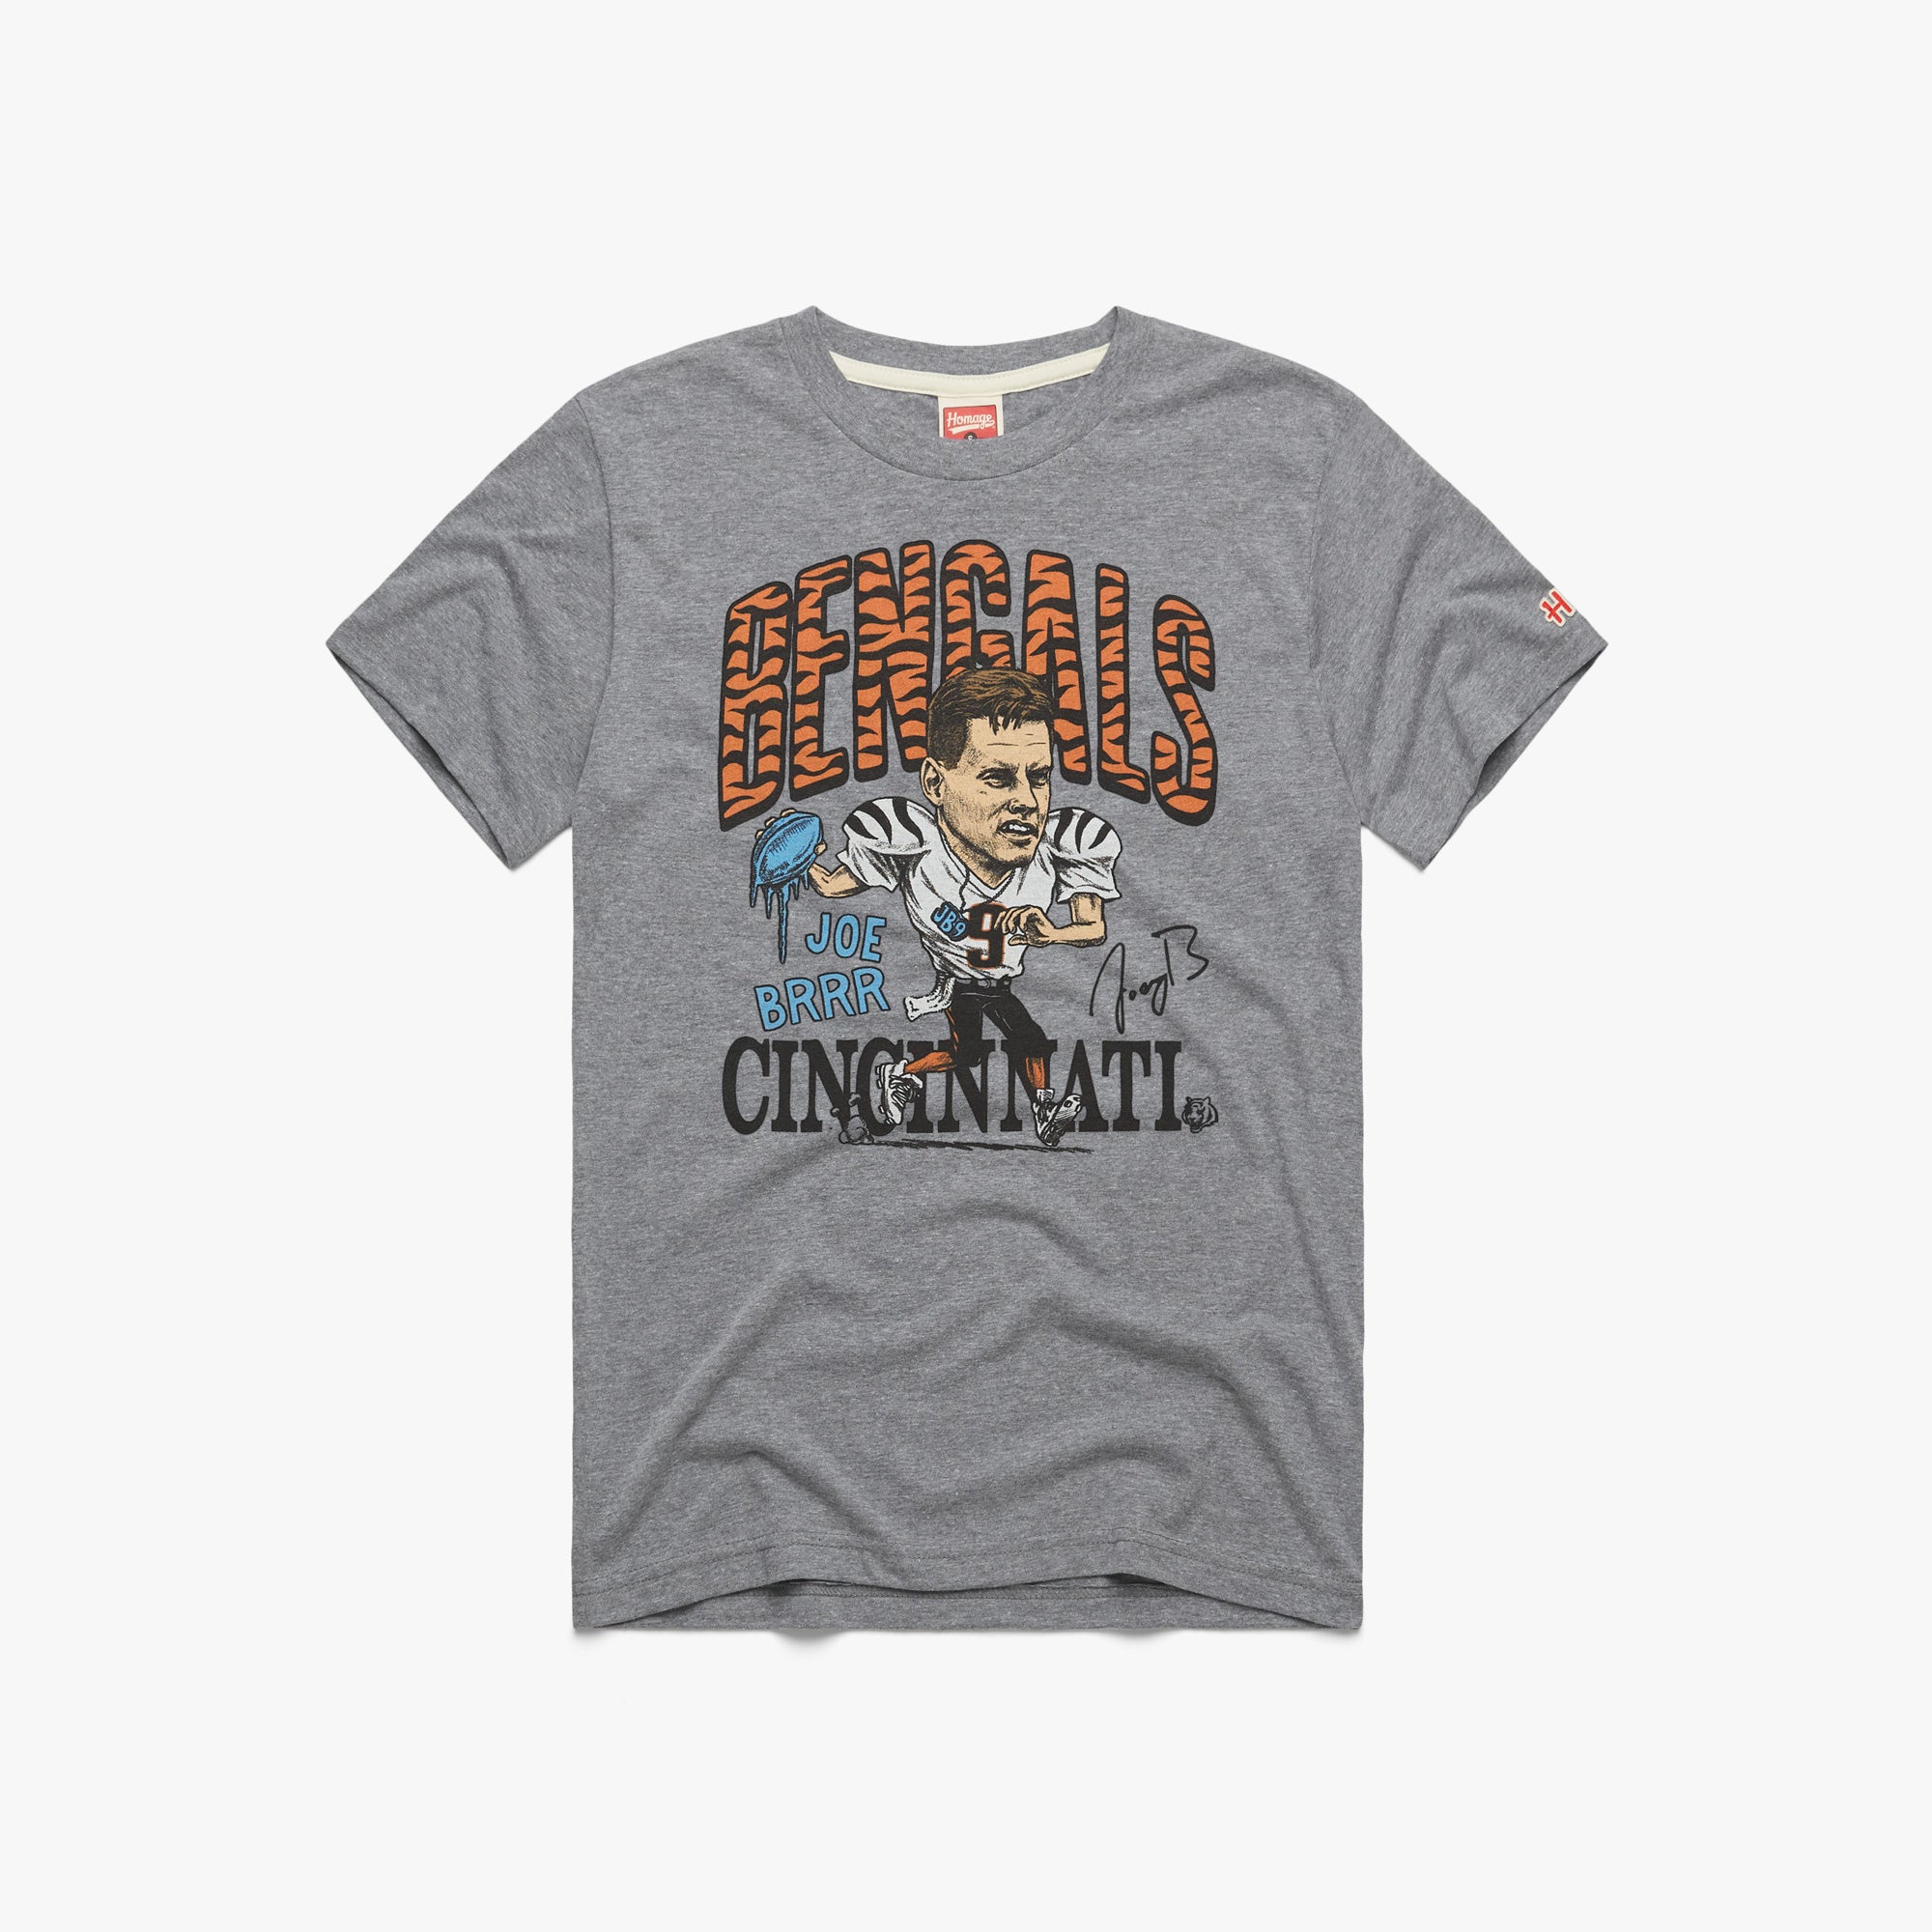 Cincinnati Bengals Joe Burrow Signature T-Shirt from Homage. | Officially Licensed Vintage NFL Apparel from Homage Pro Shop.